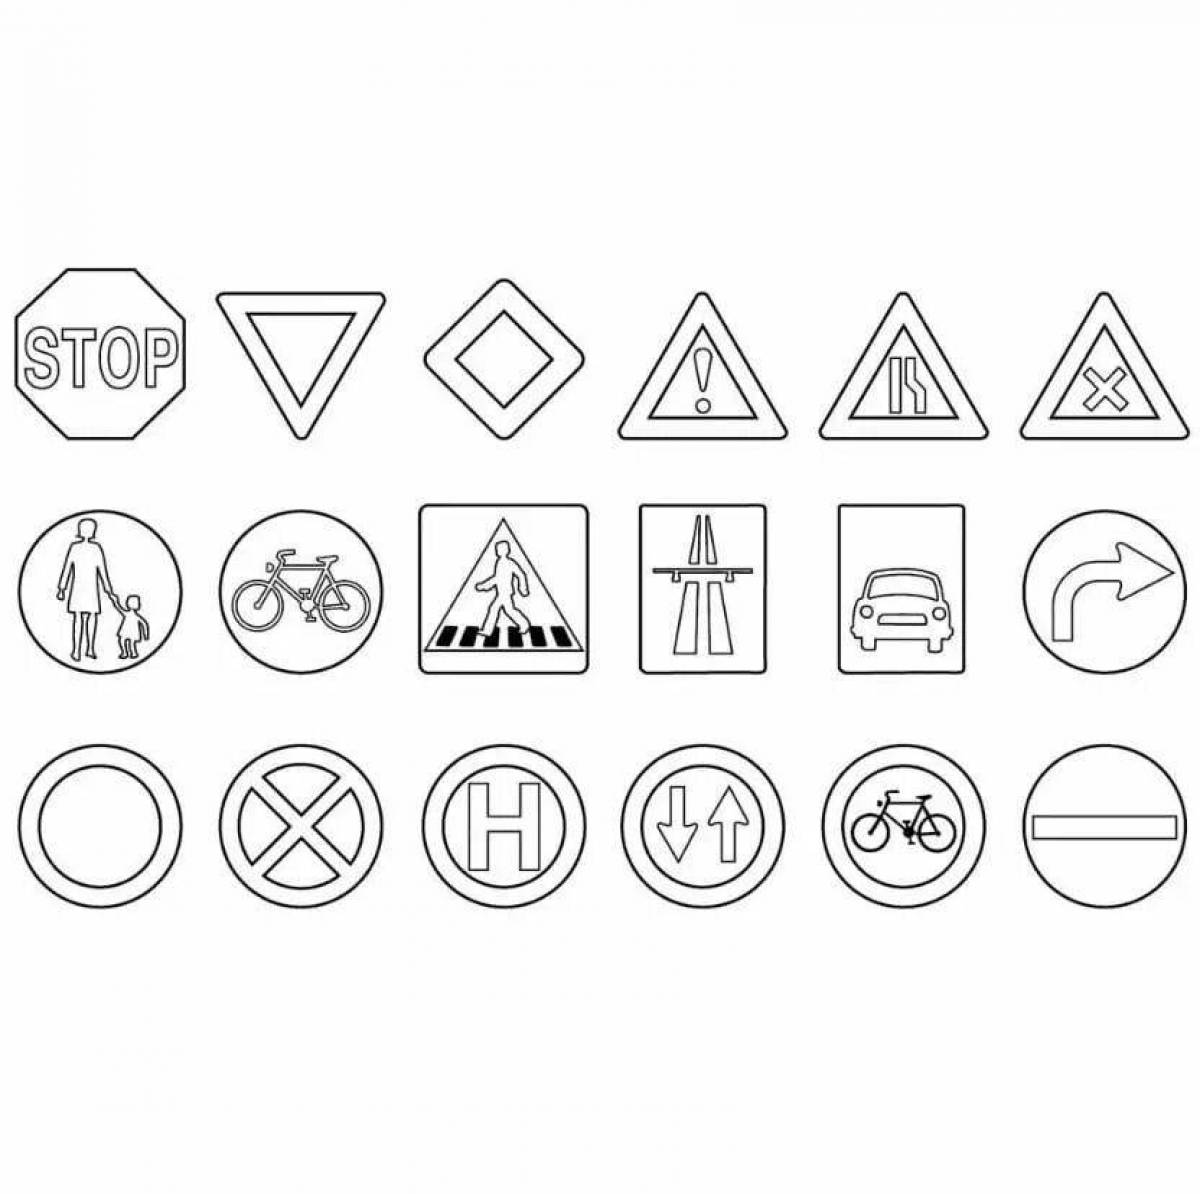 Exciting road signs coloring page